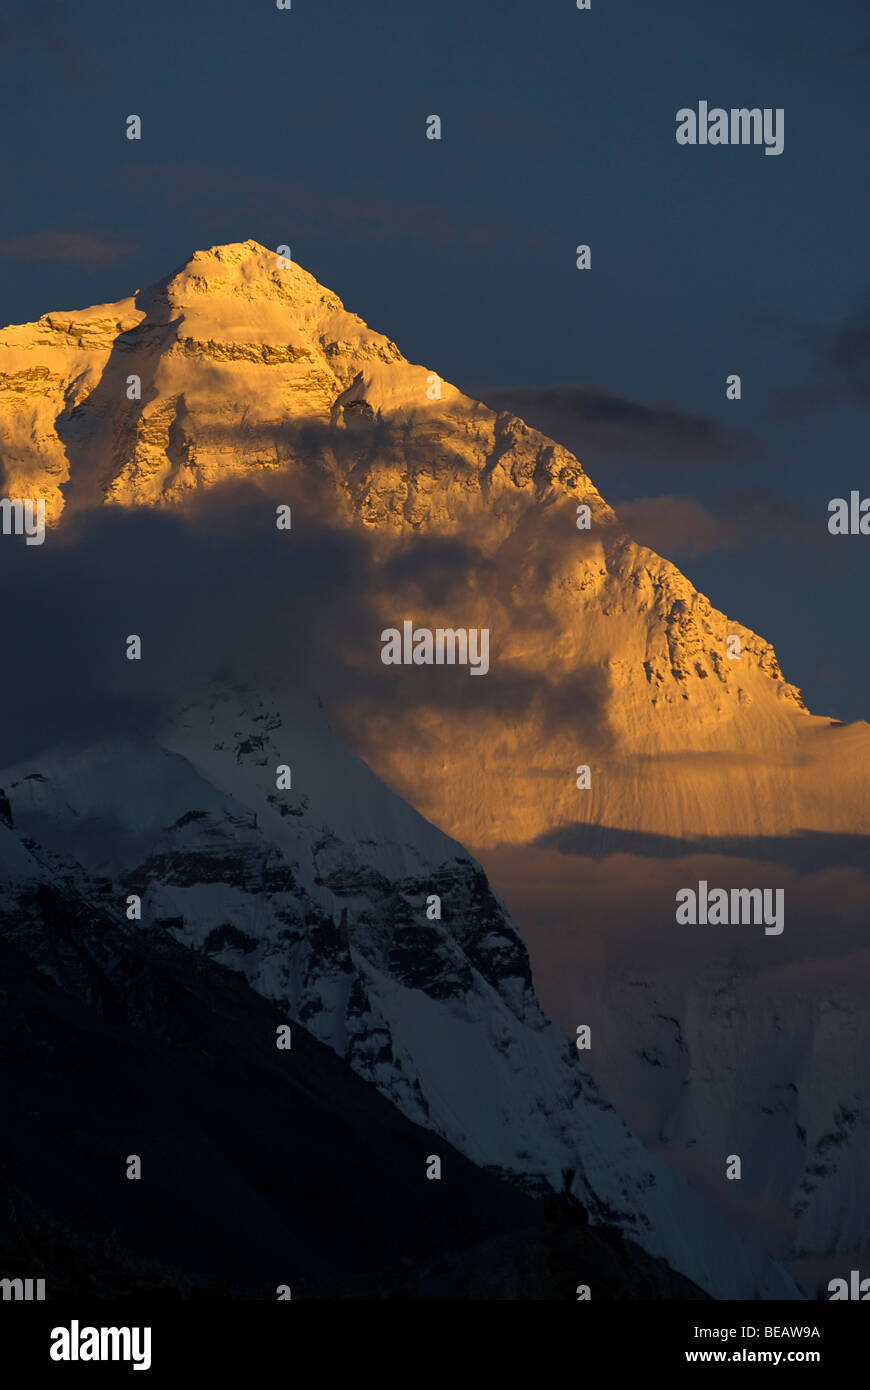 Mount Everest at sunset viewed from Base Camp, Tibet. Stock Photo